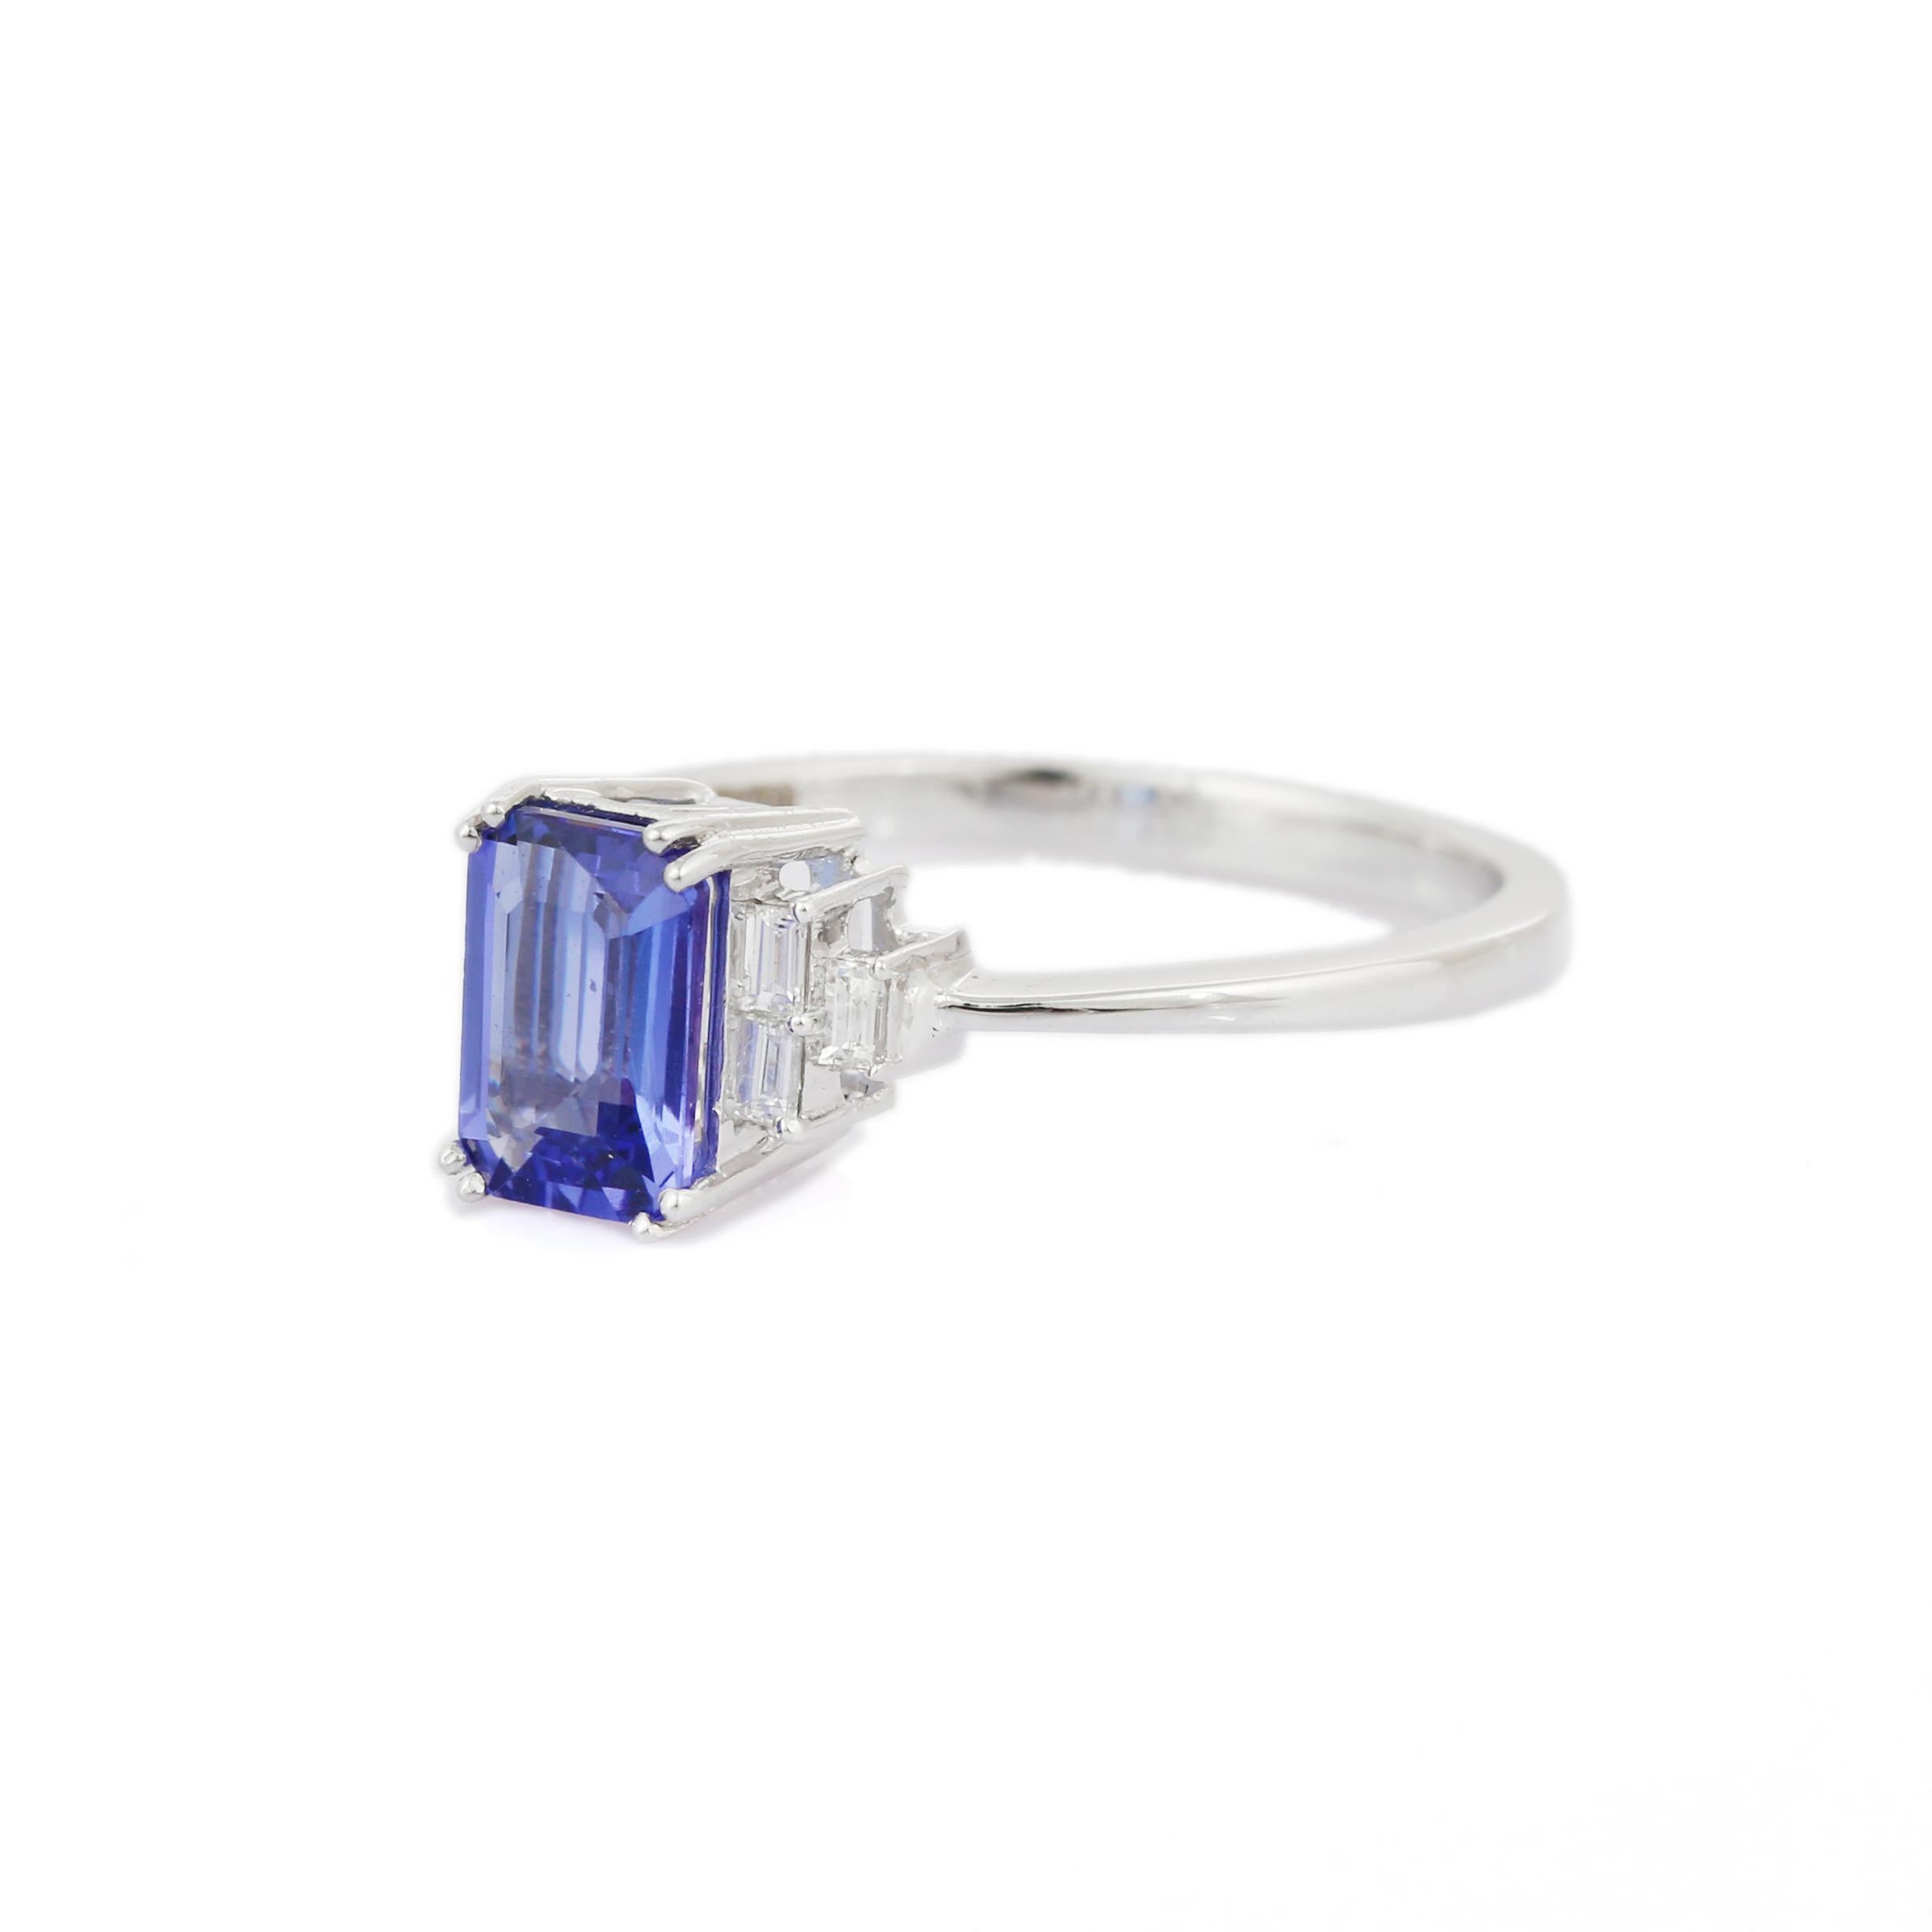 For Sale:  Octagon Shape Tanzanite Ring with Diamonds in 18K White Gold 2